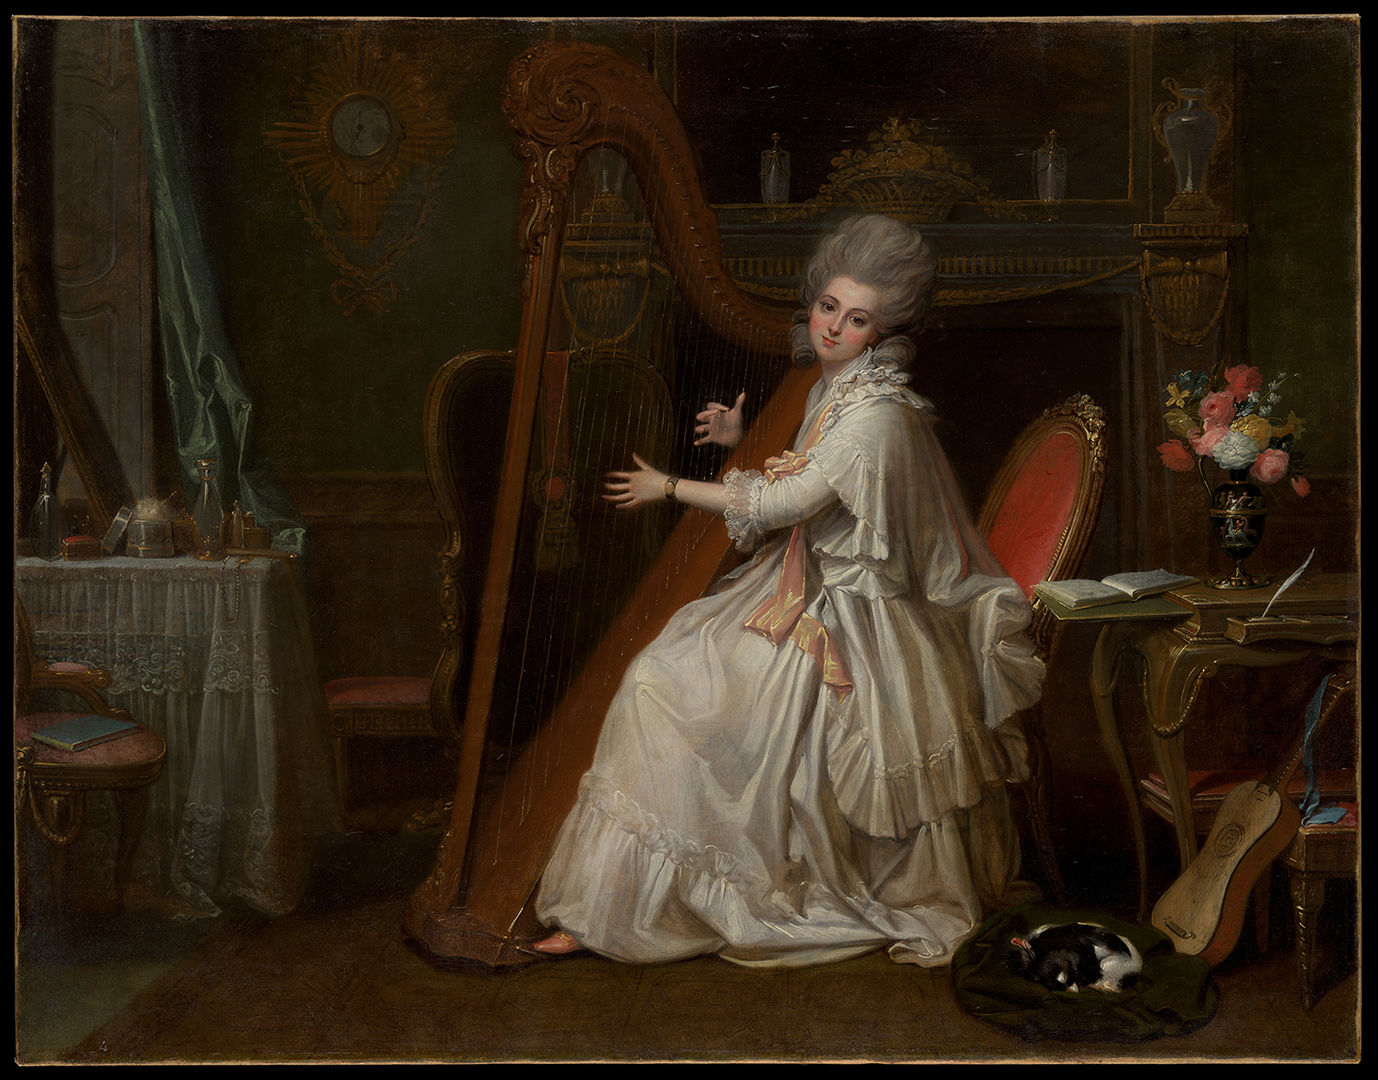 Painting of a woman in a white dress playing the harp while a lapdog sleeps at her feet in an adorned dressing room